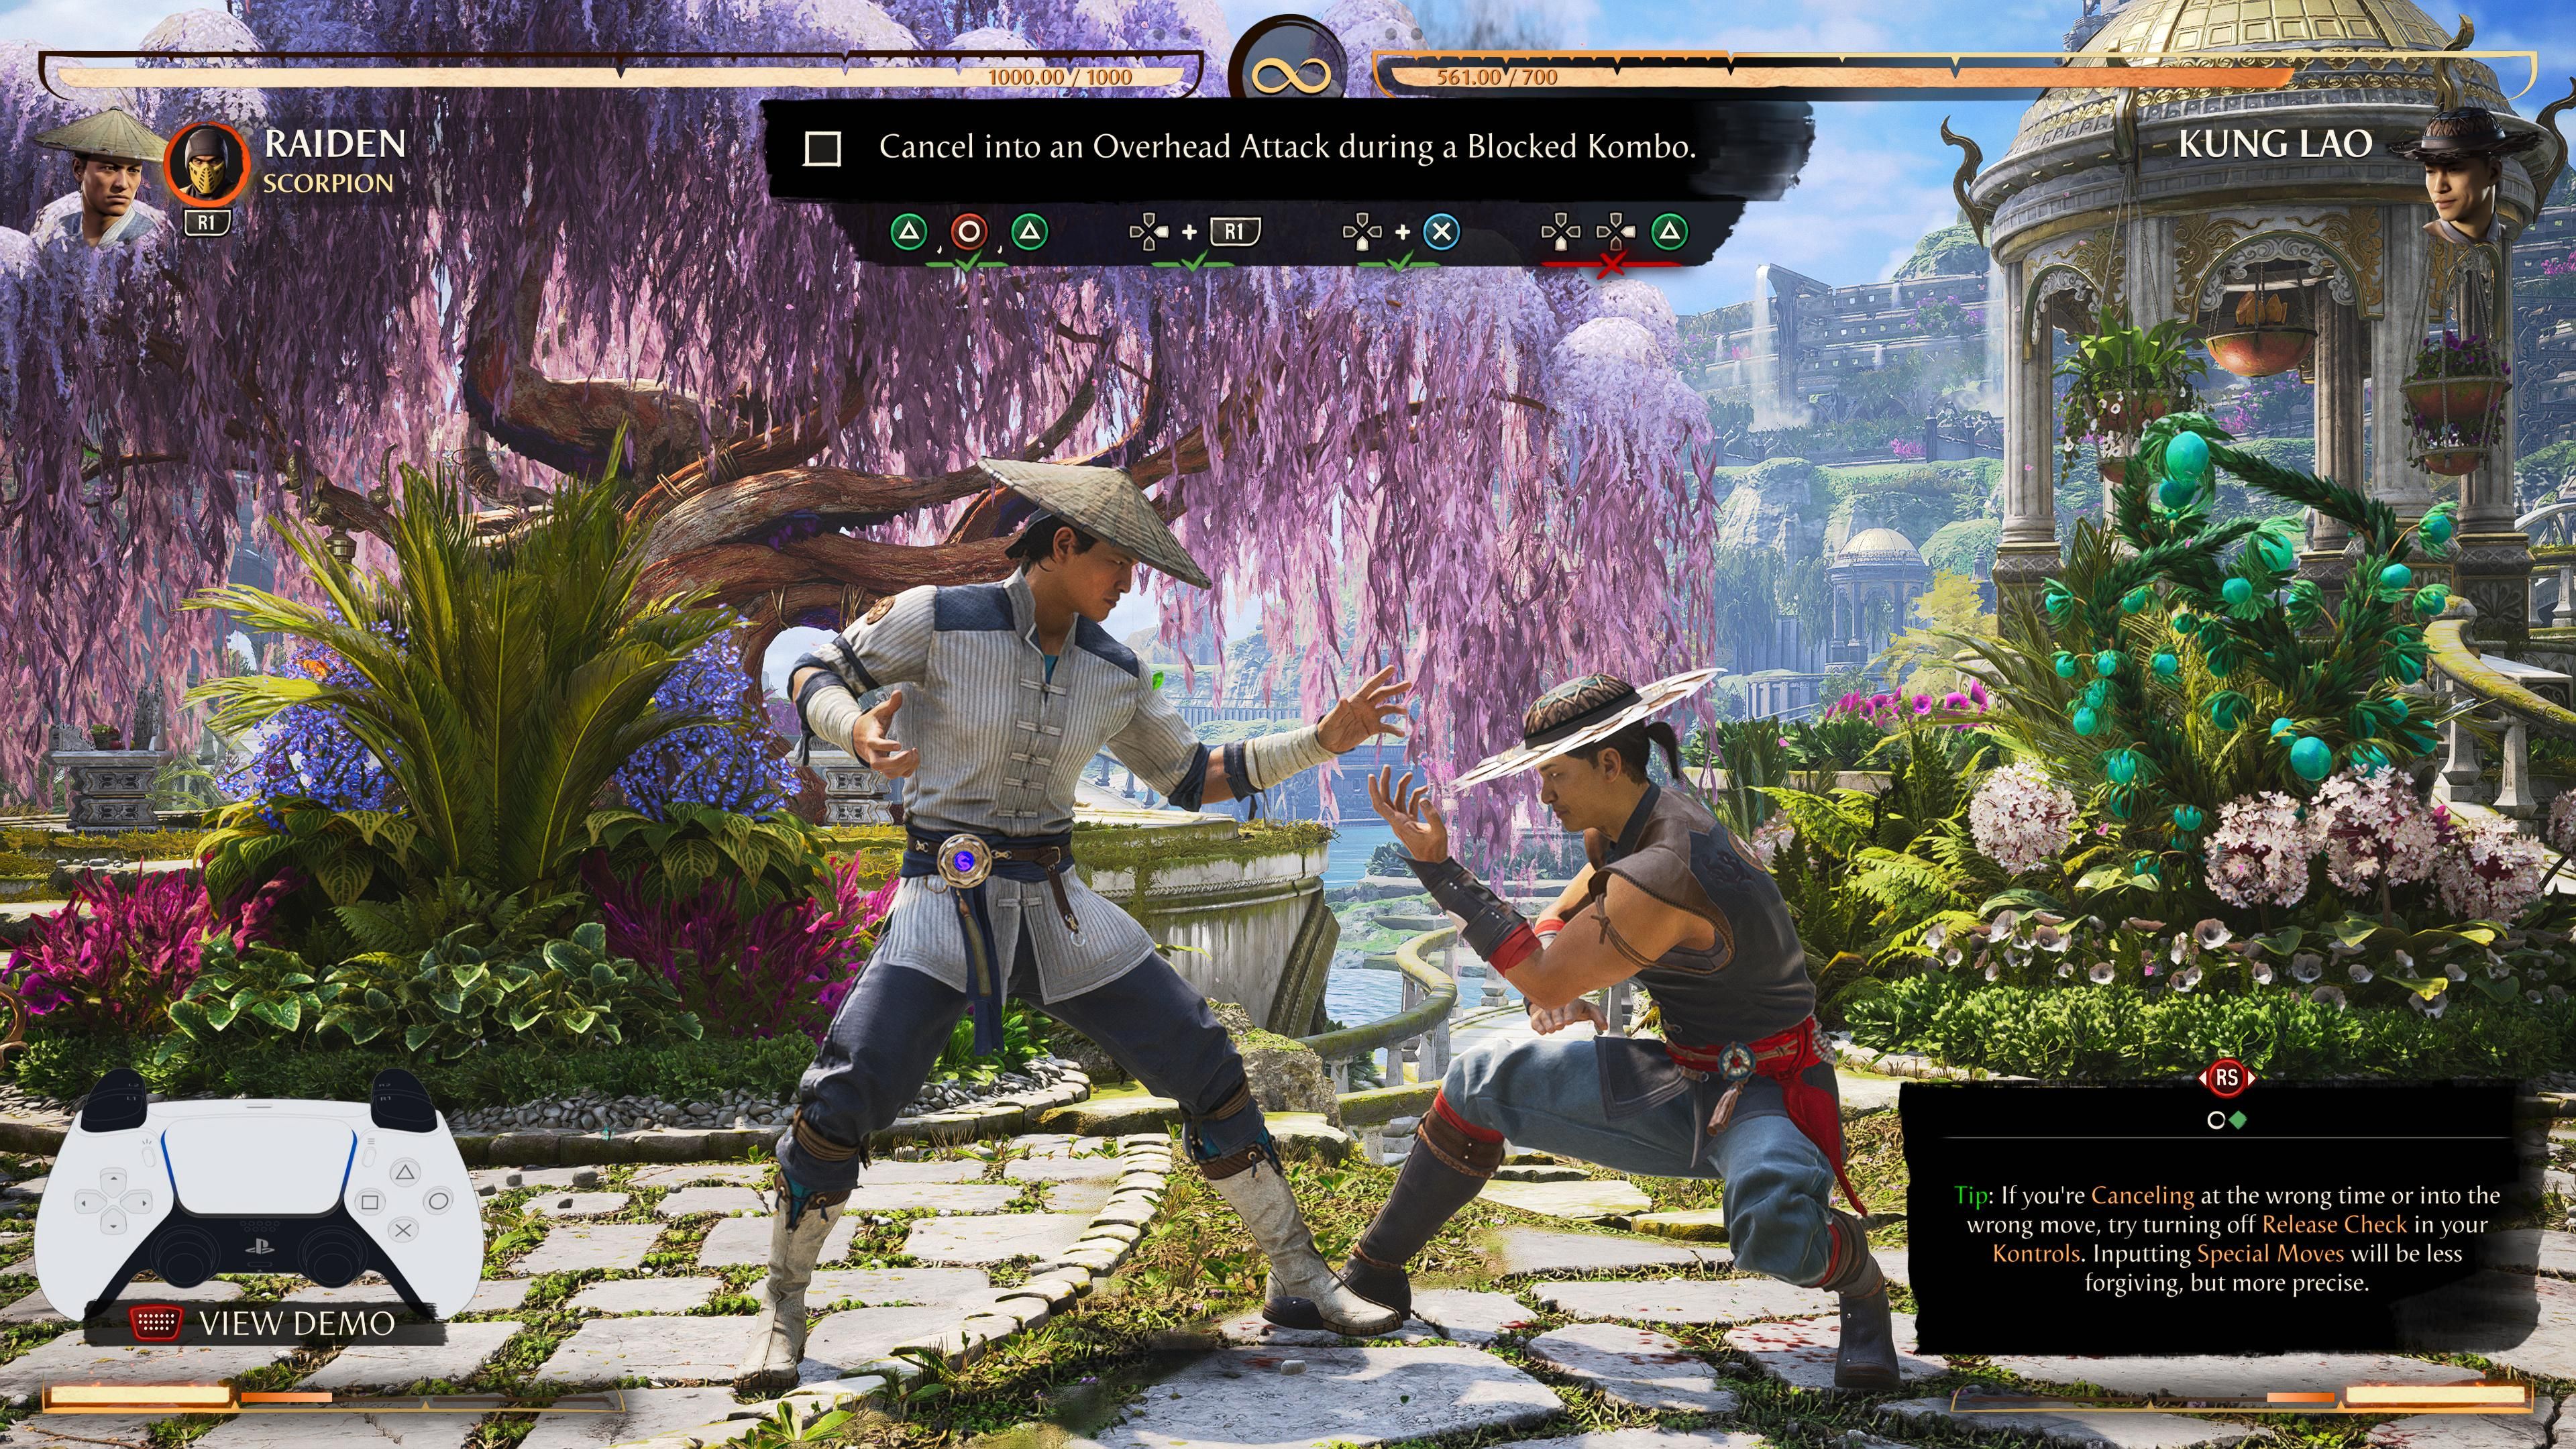 A screenshot showing one of Raiden's possible strings to cancel.